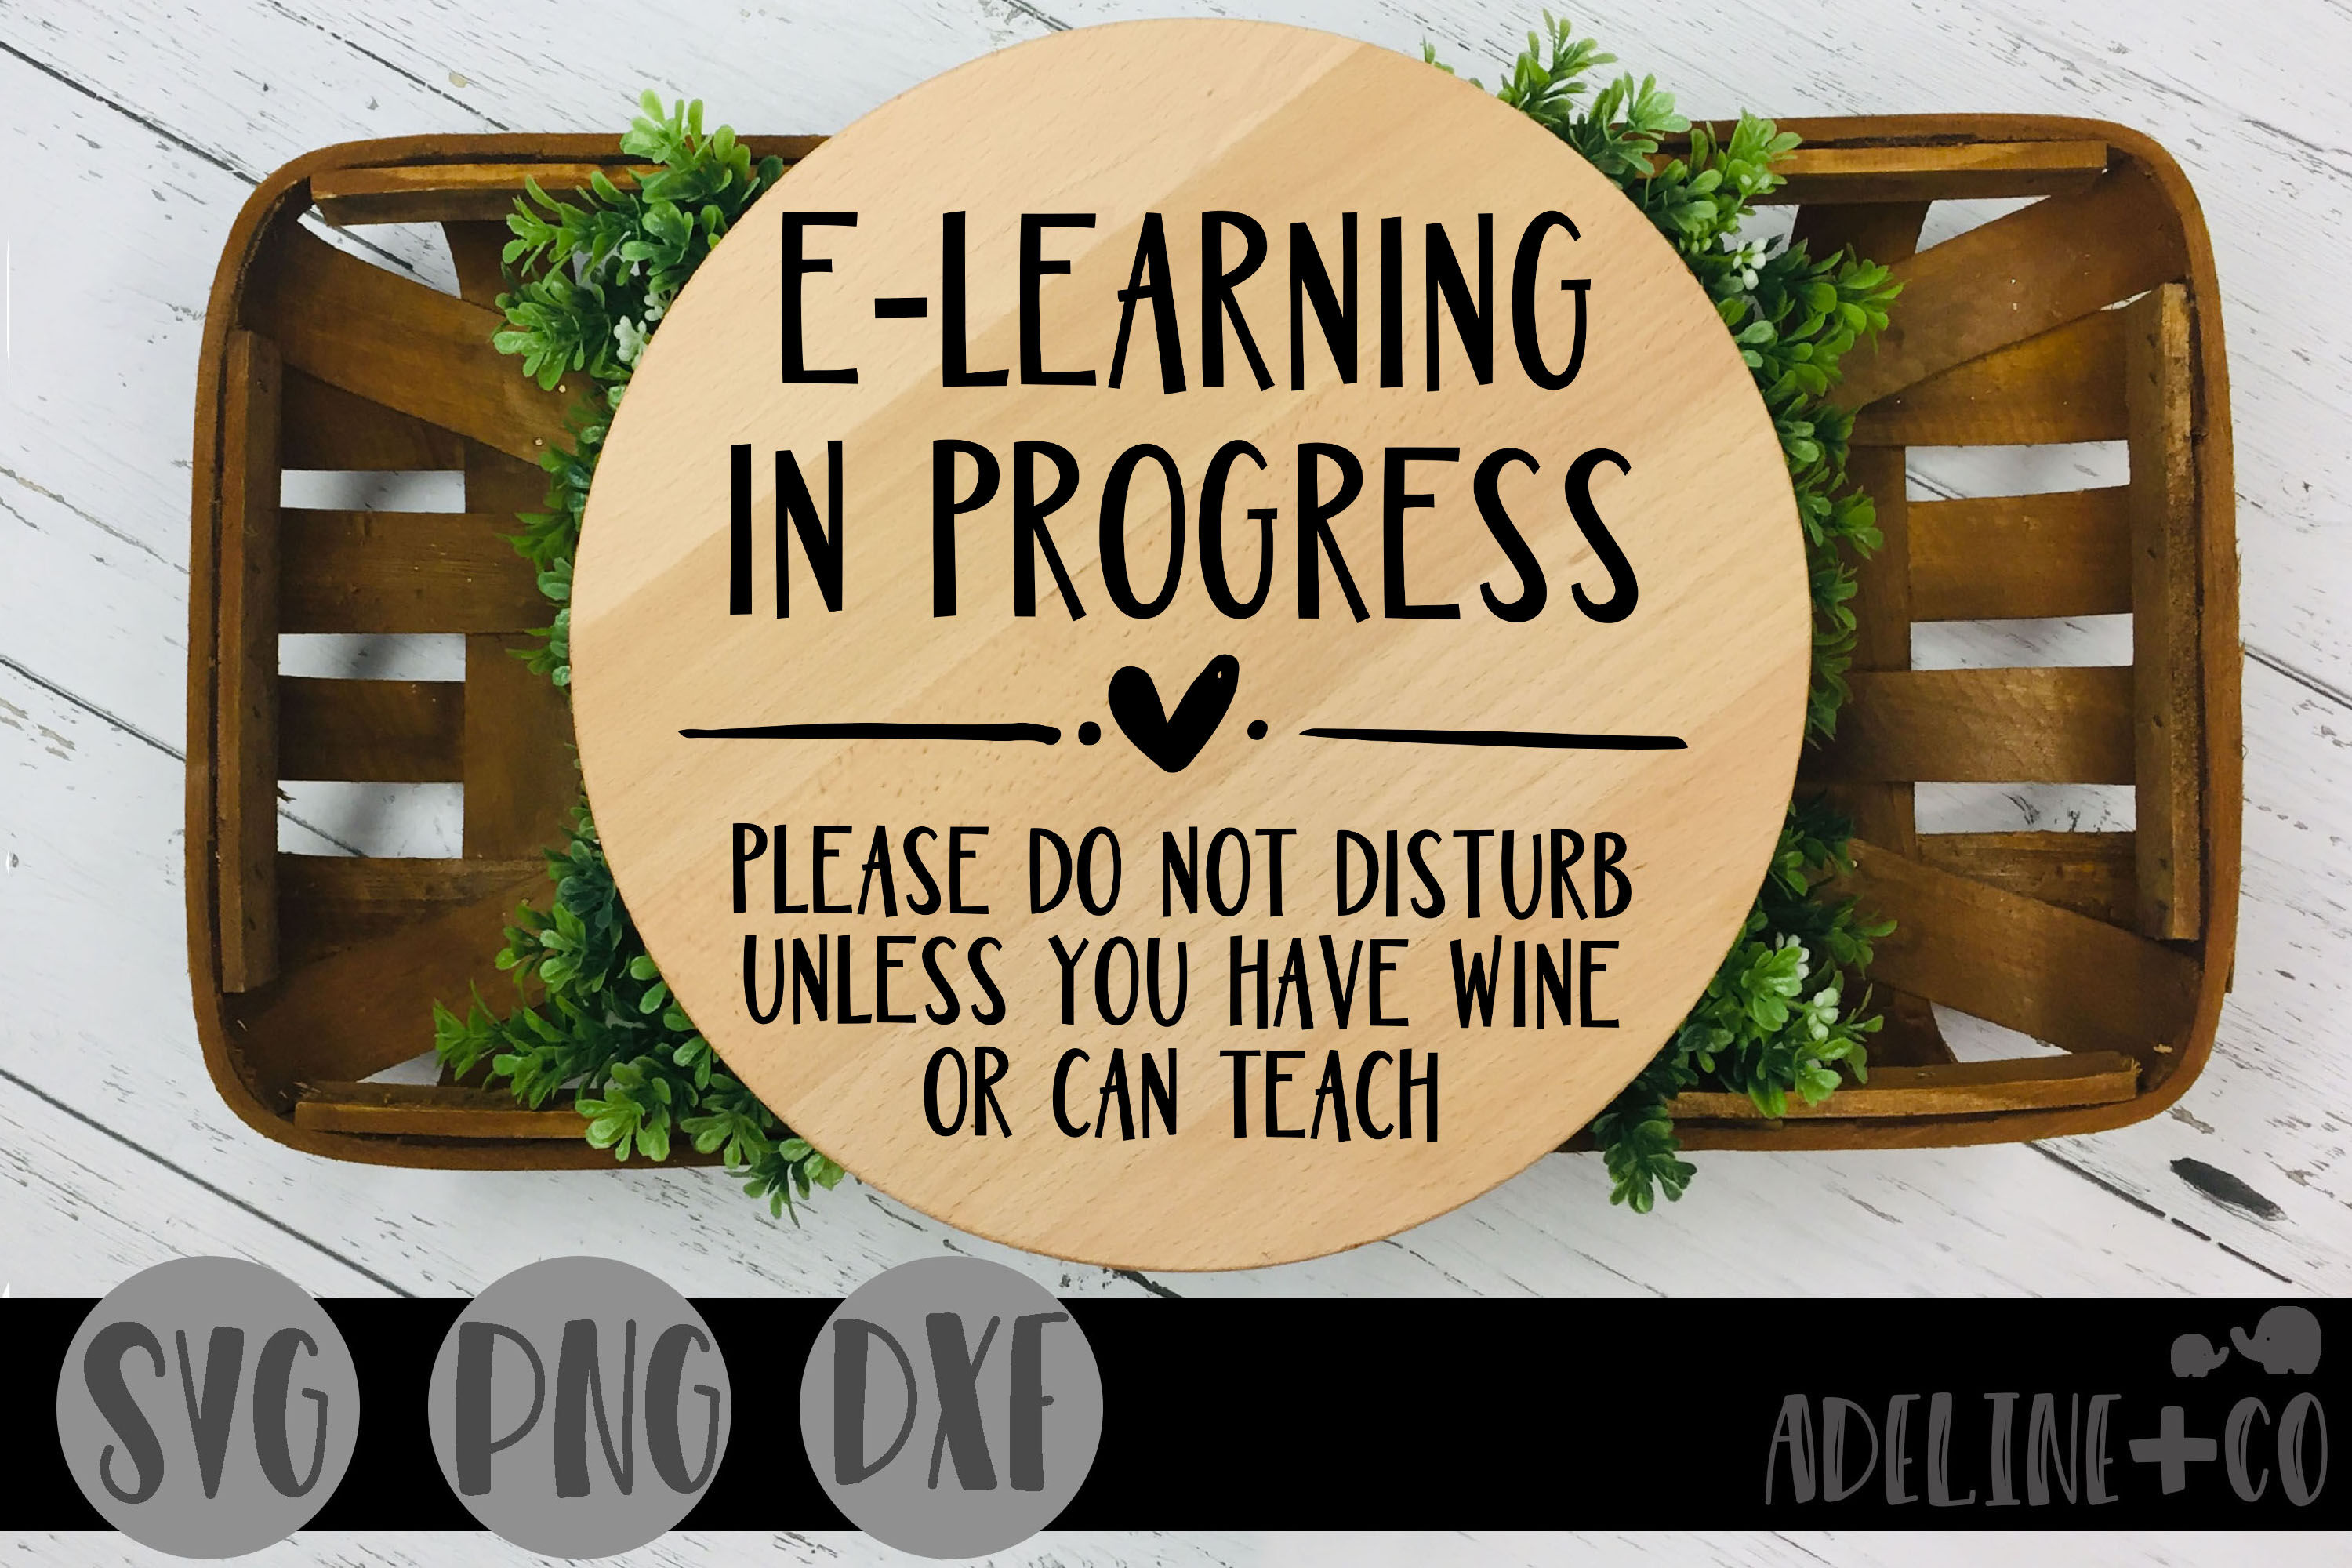 E Learning In Progress Svg Png Dxf By Adeline Co Thehungryjpeg Com